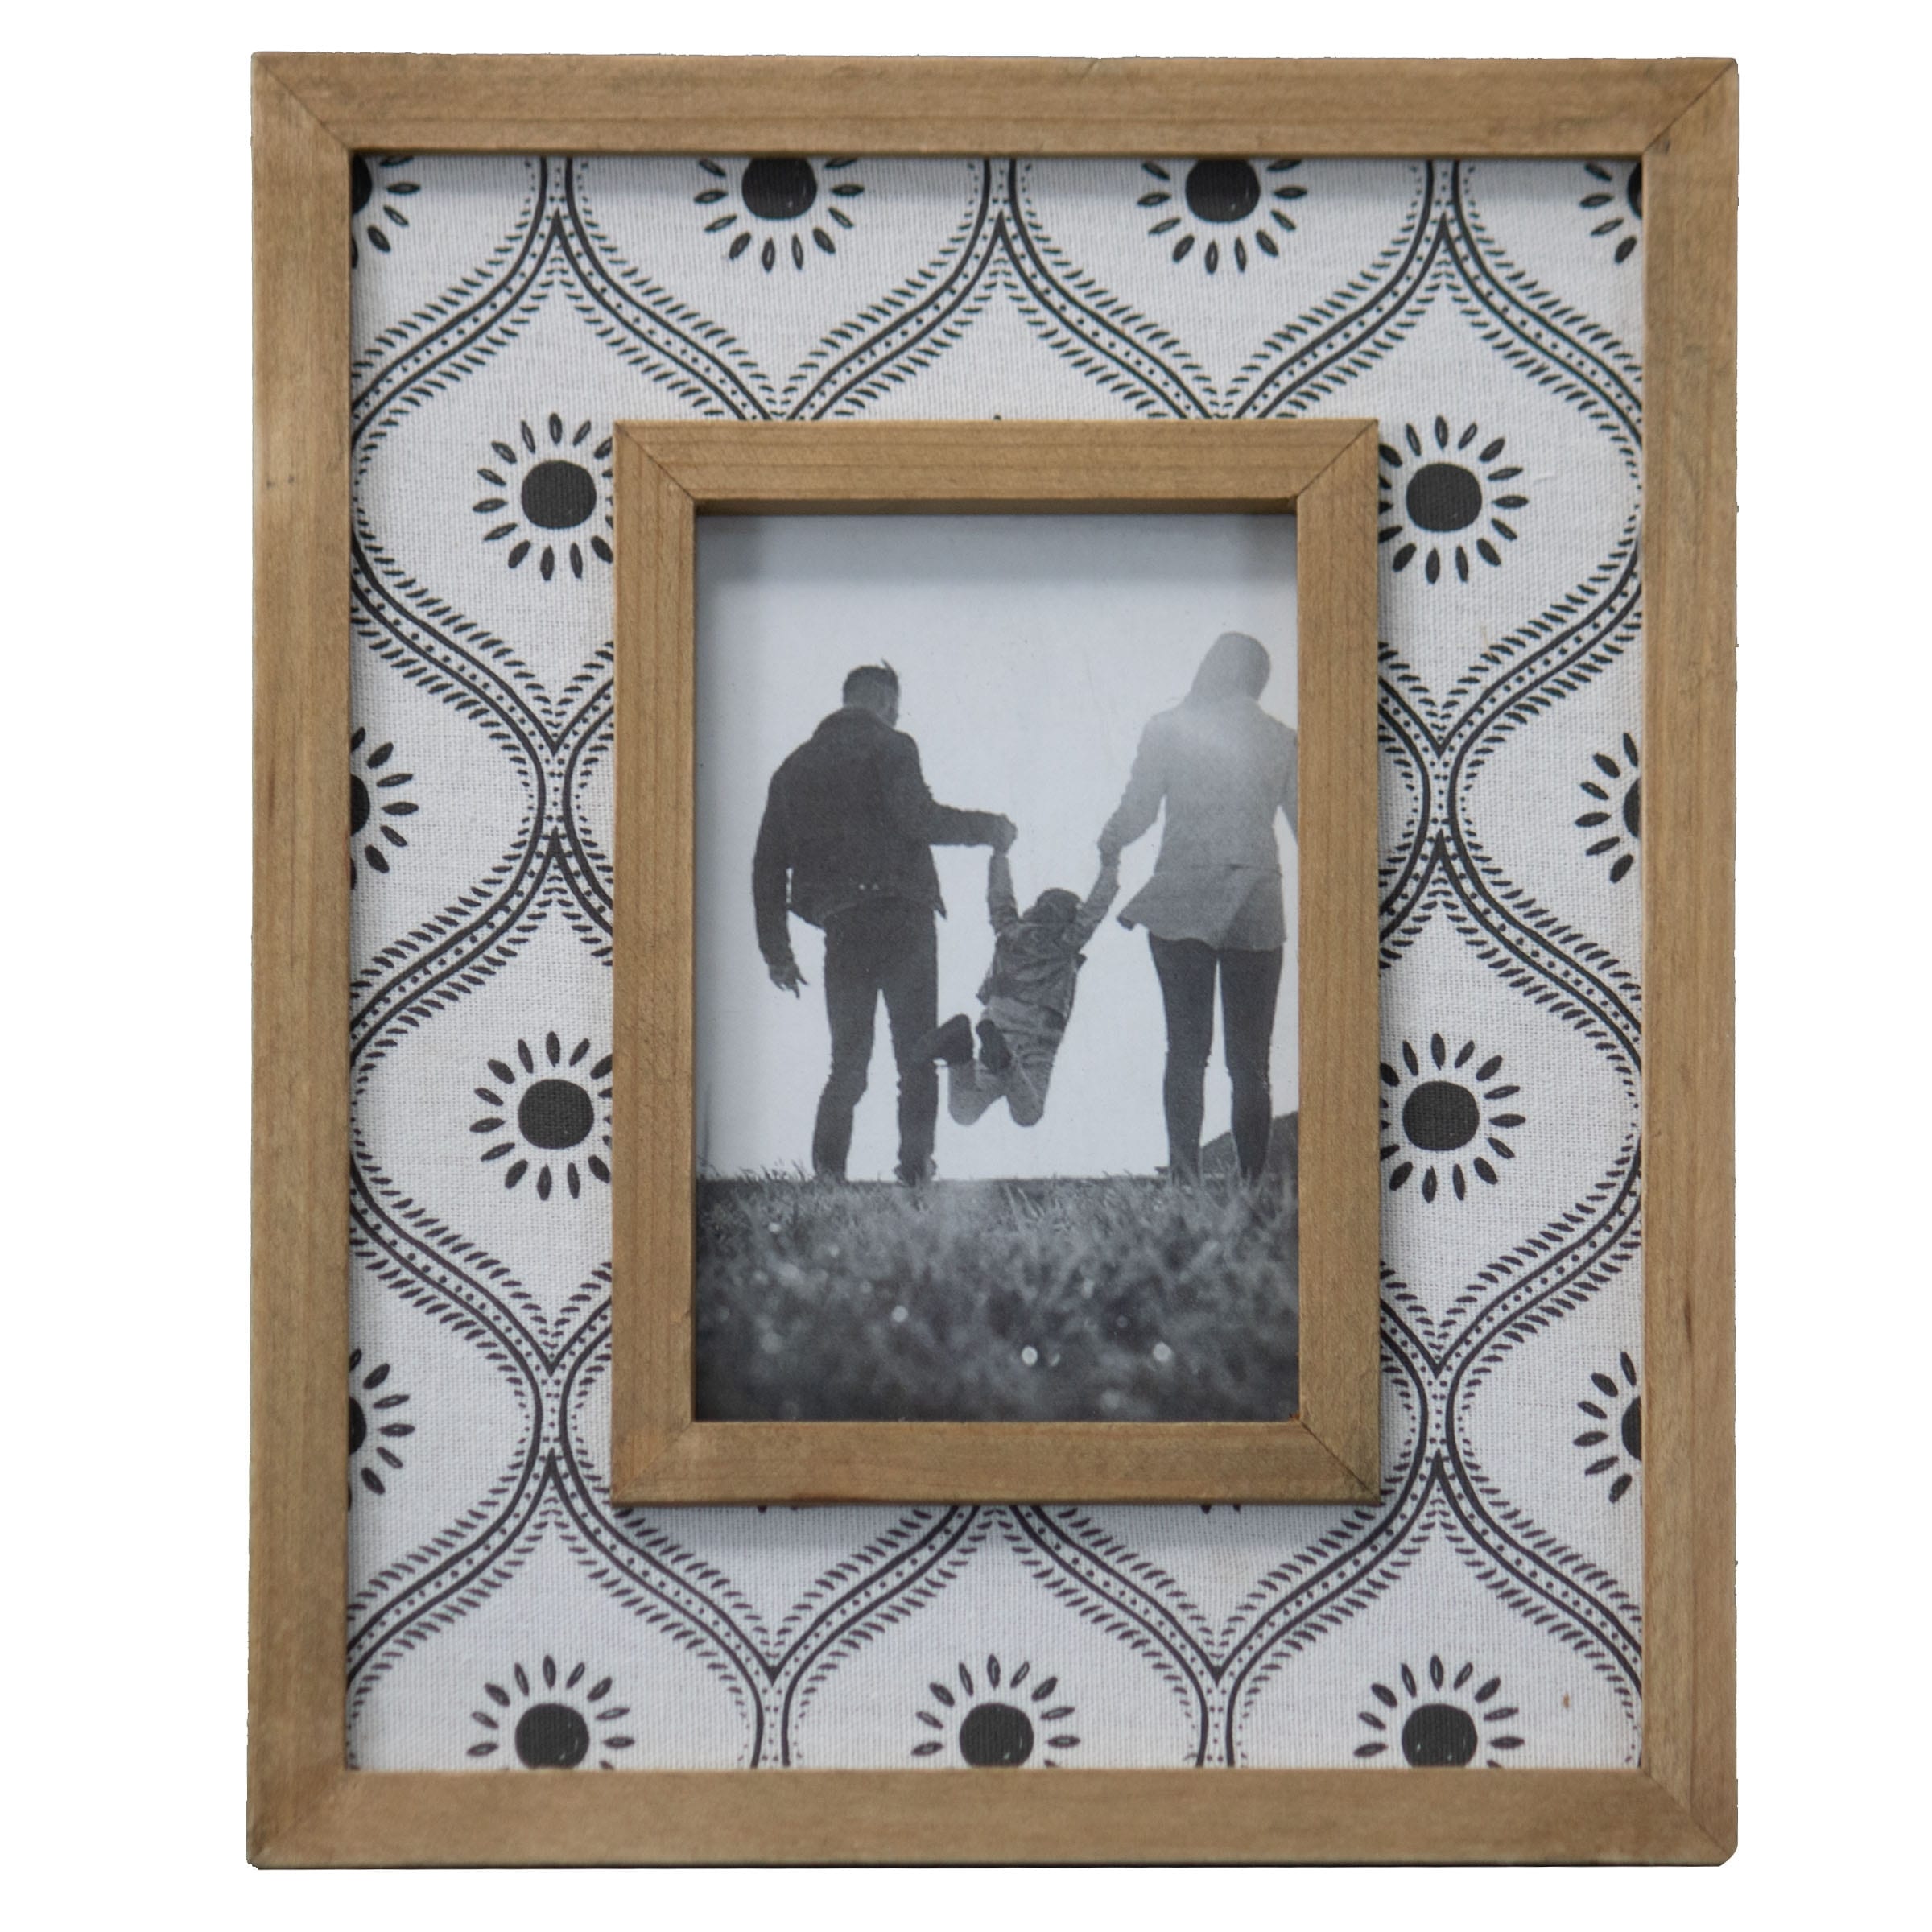 20x20 Frame White Real Wood Picture Frame Width 0.75 inches